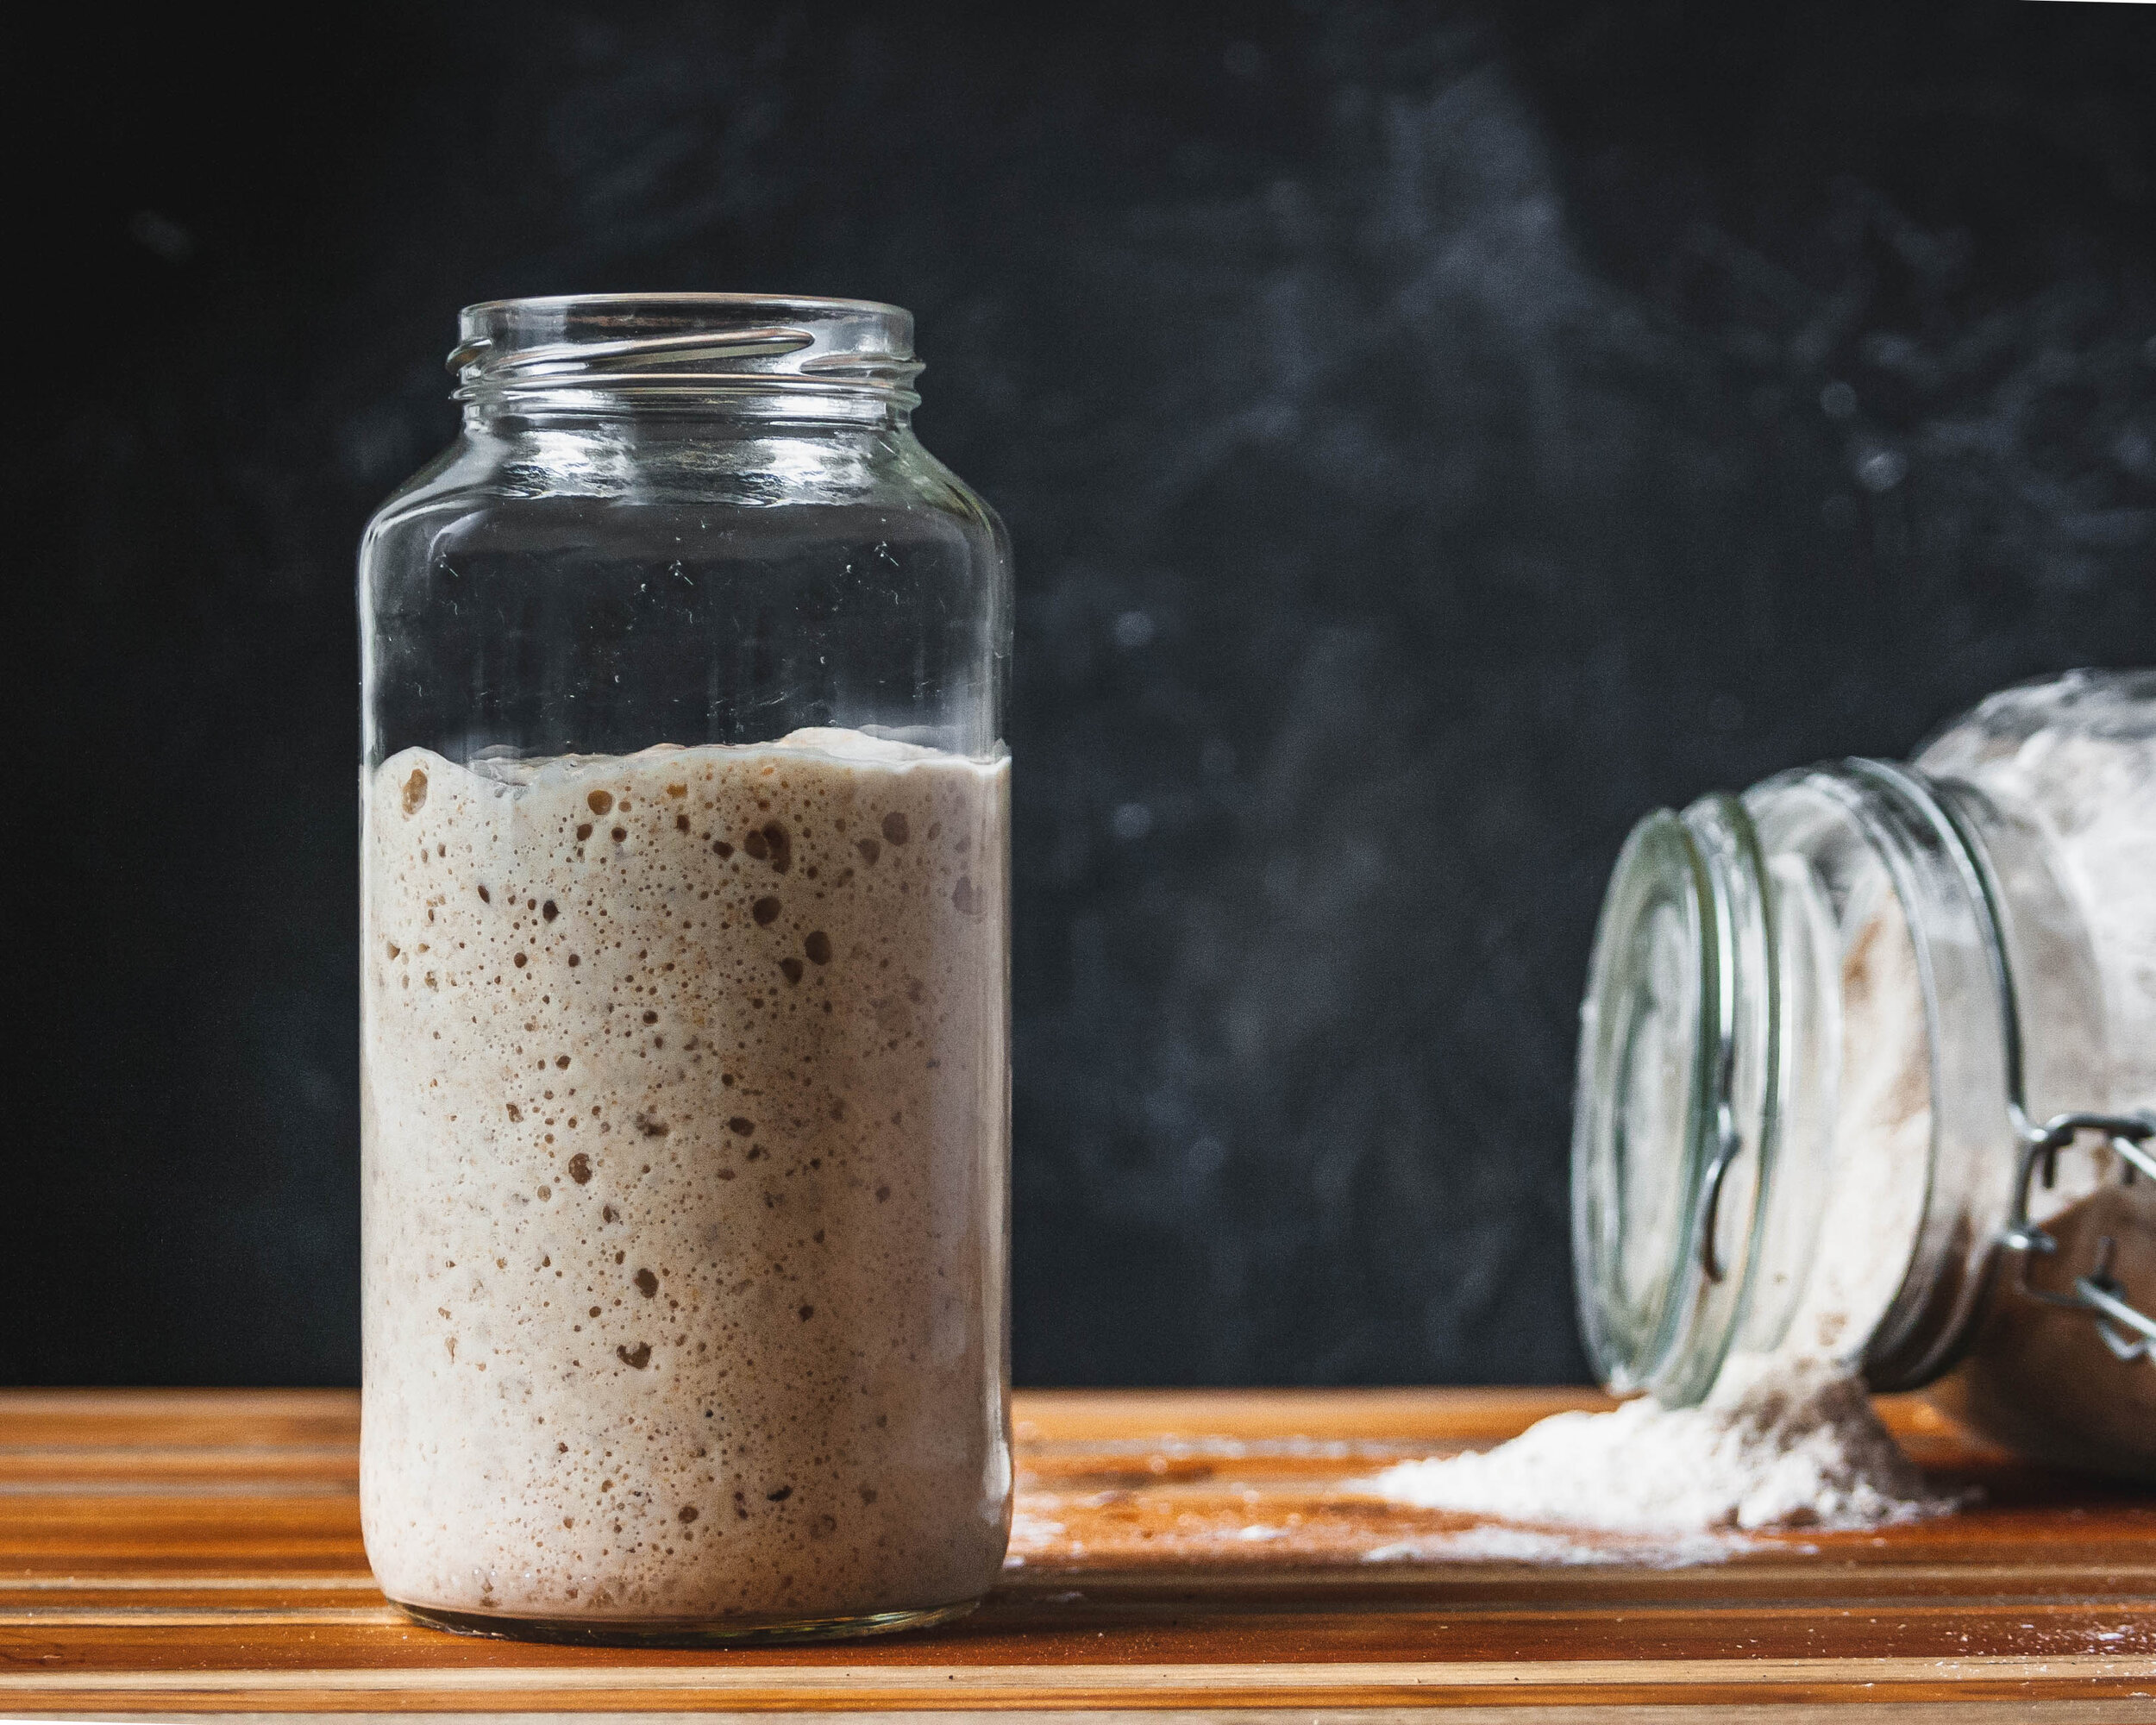 Sourdough Starter Guide: Everything You Need to Know